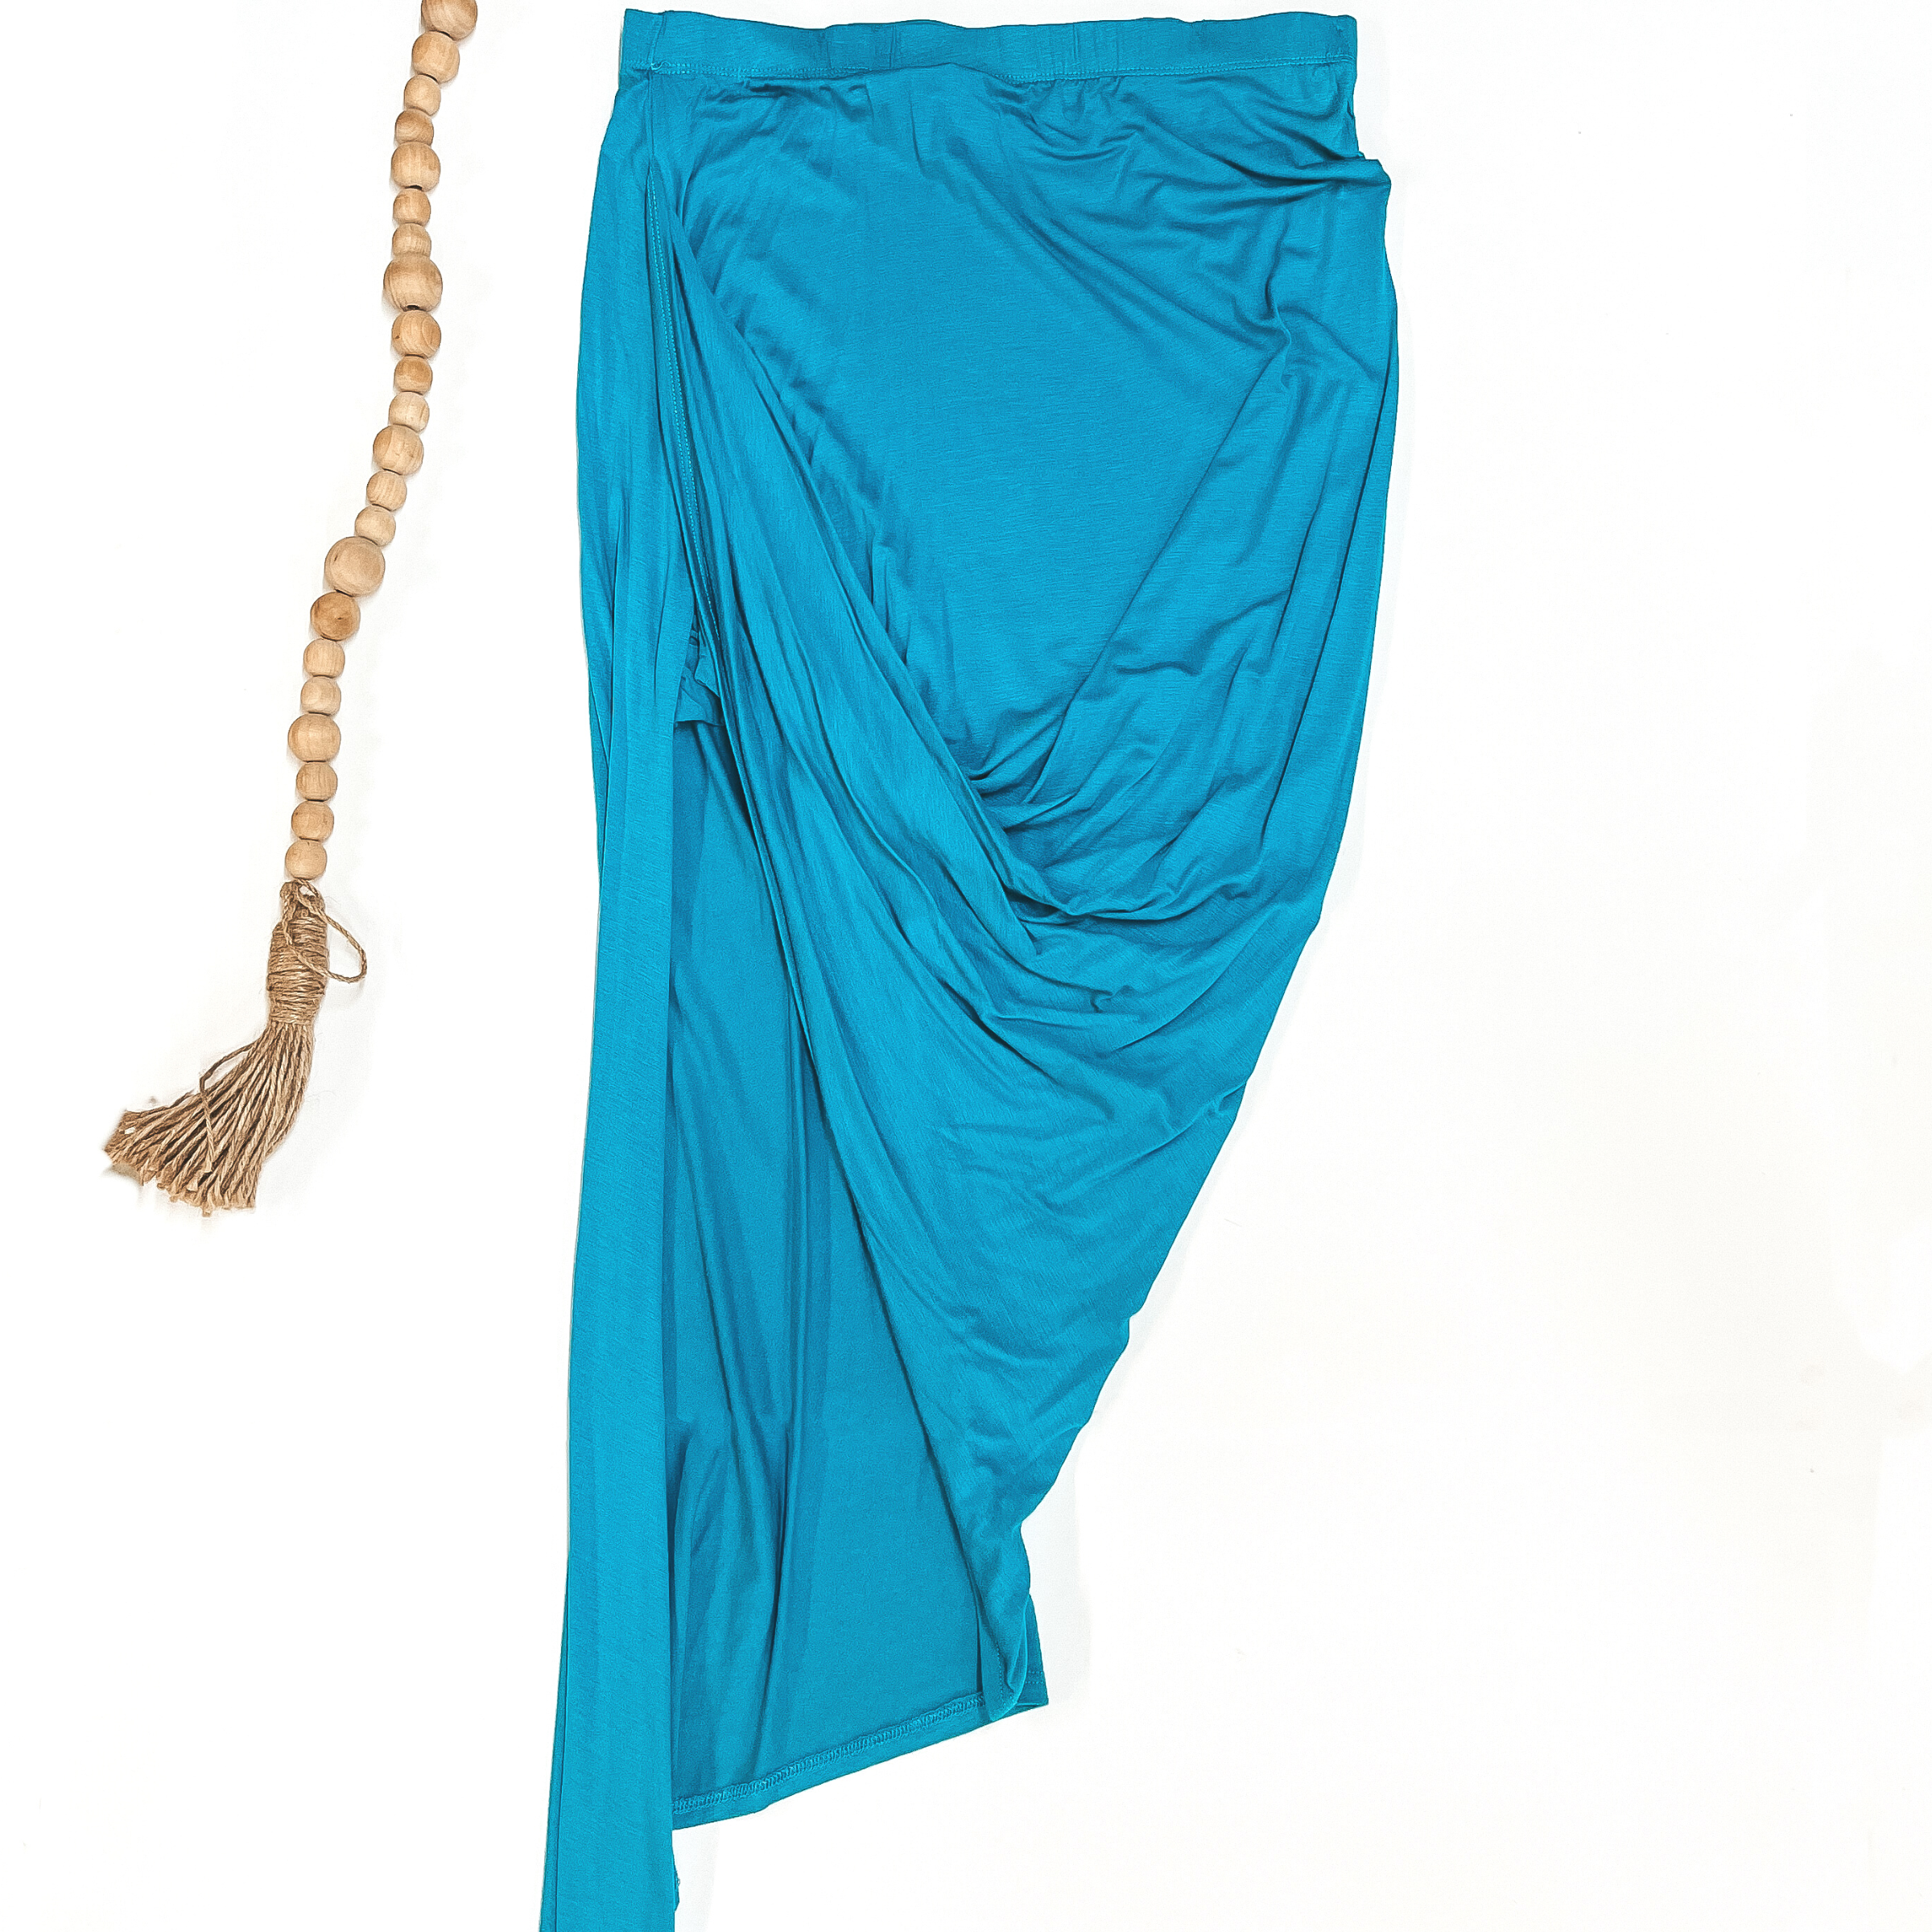 Turquoise Draped Asymmetrical Skirt - Giddy Up Glamour Boutique